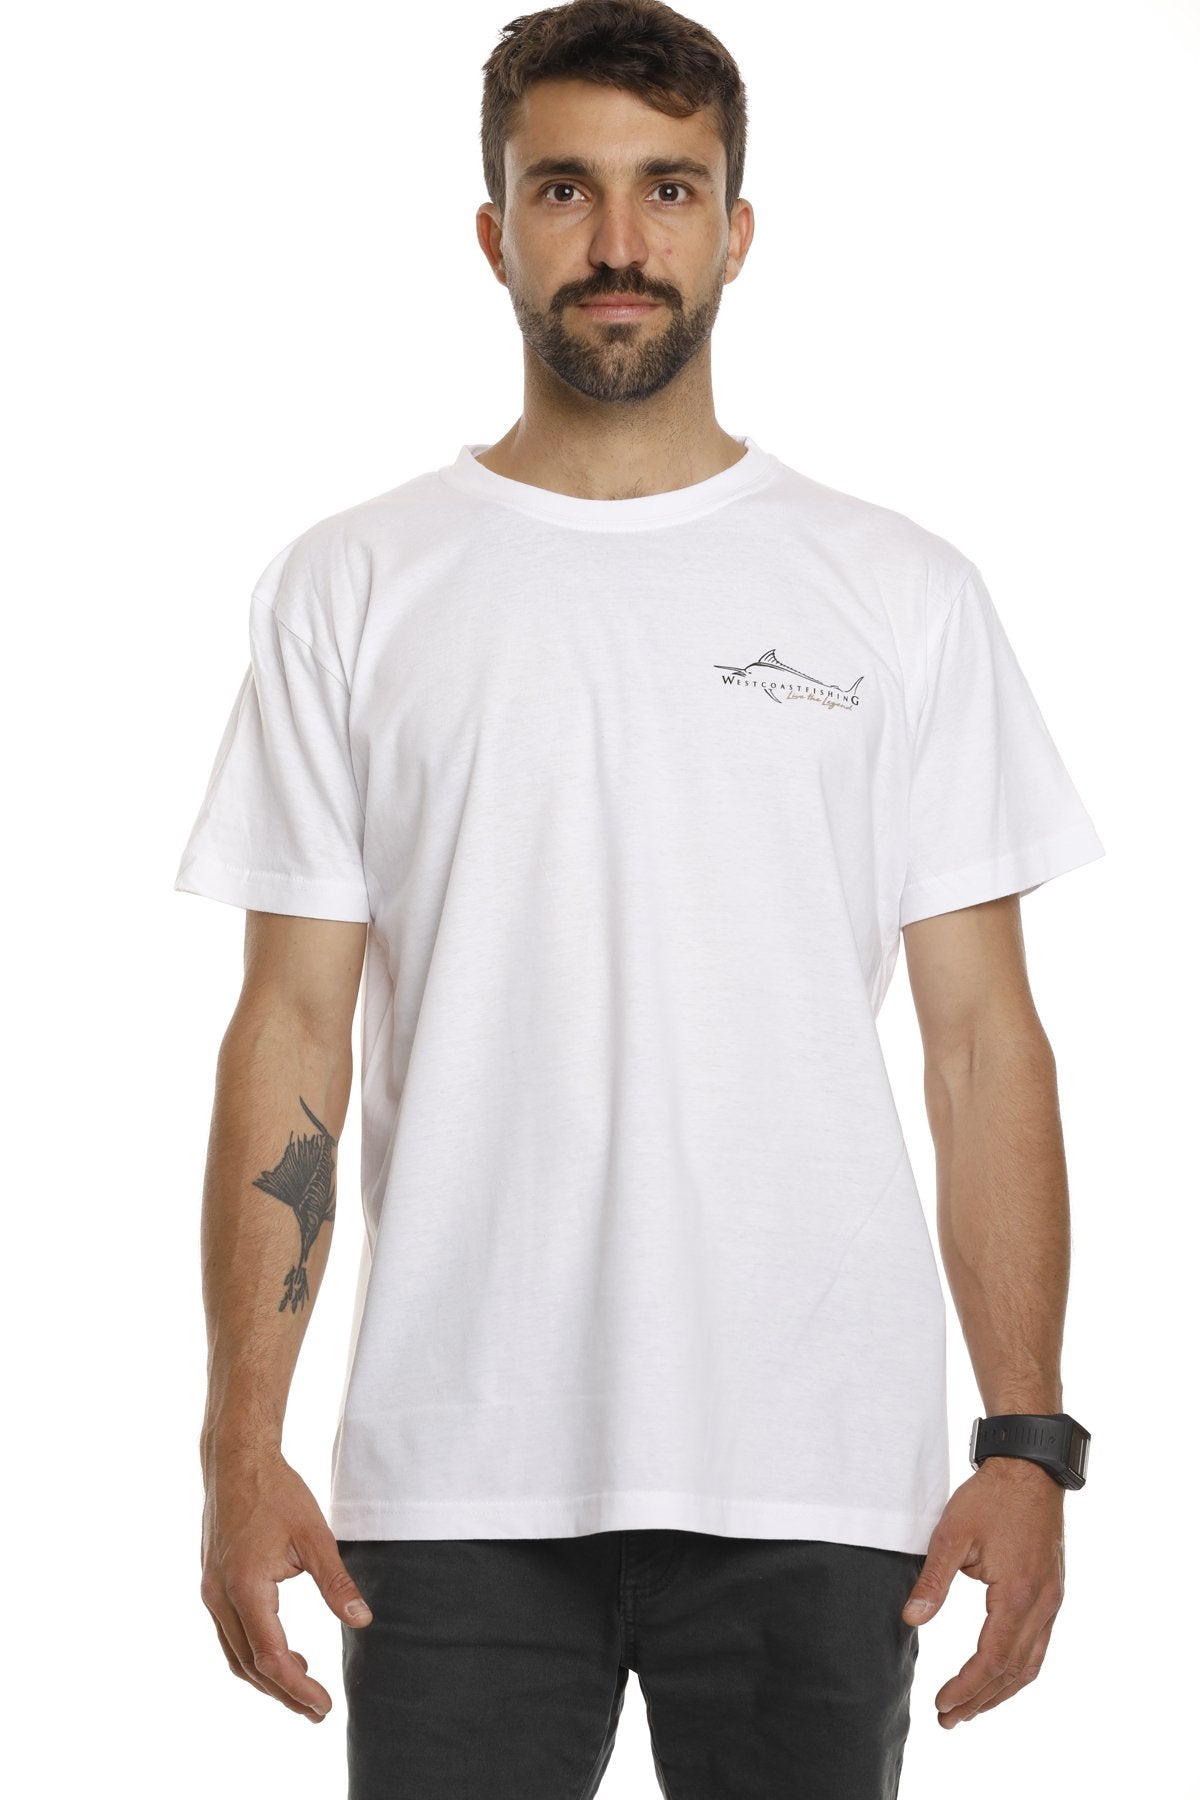 West Coast Fishing Co Heavy Tackle Tee White Front